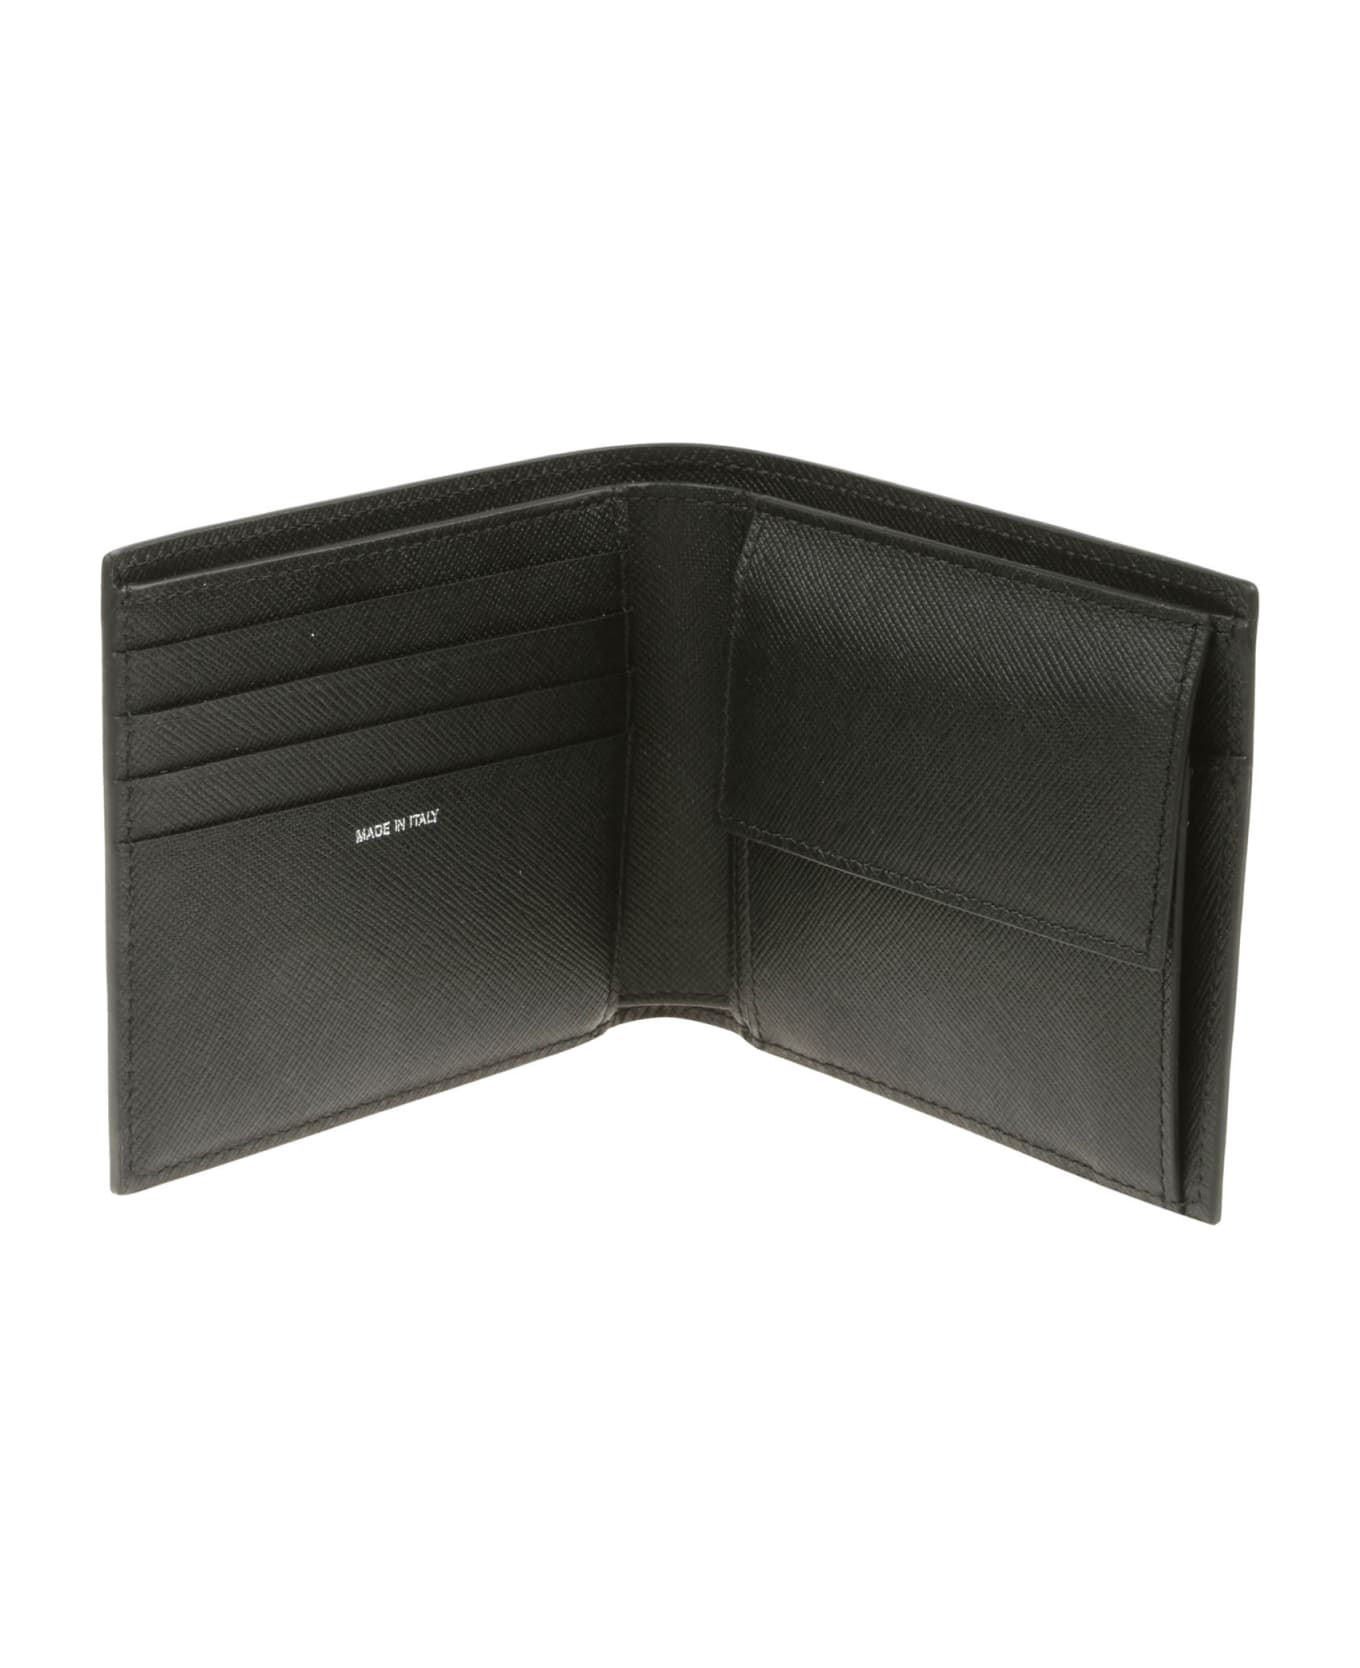 Paul Smith Wallet Bfold Coin - Printed